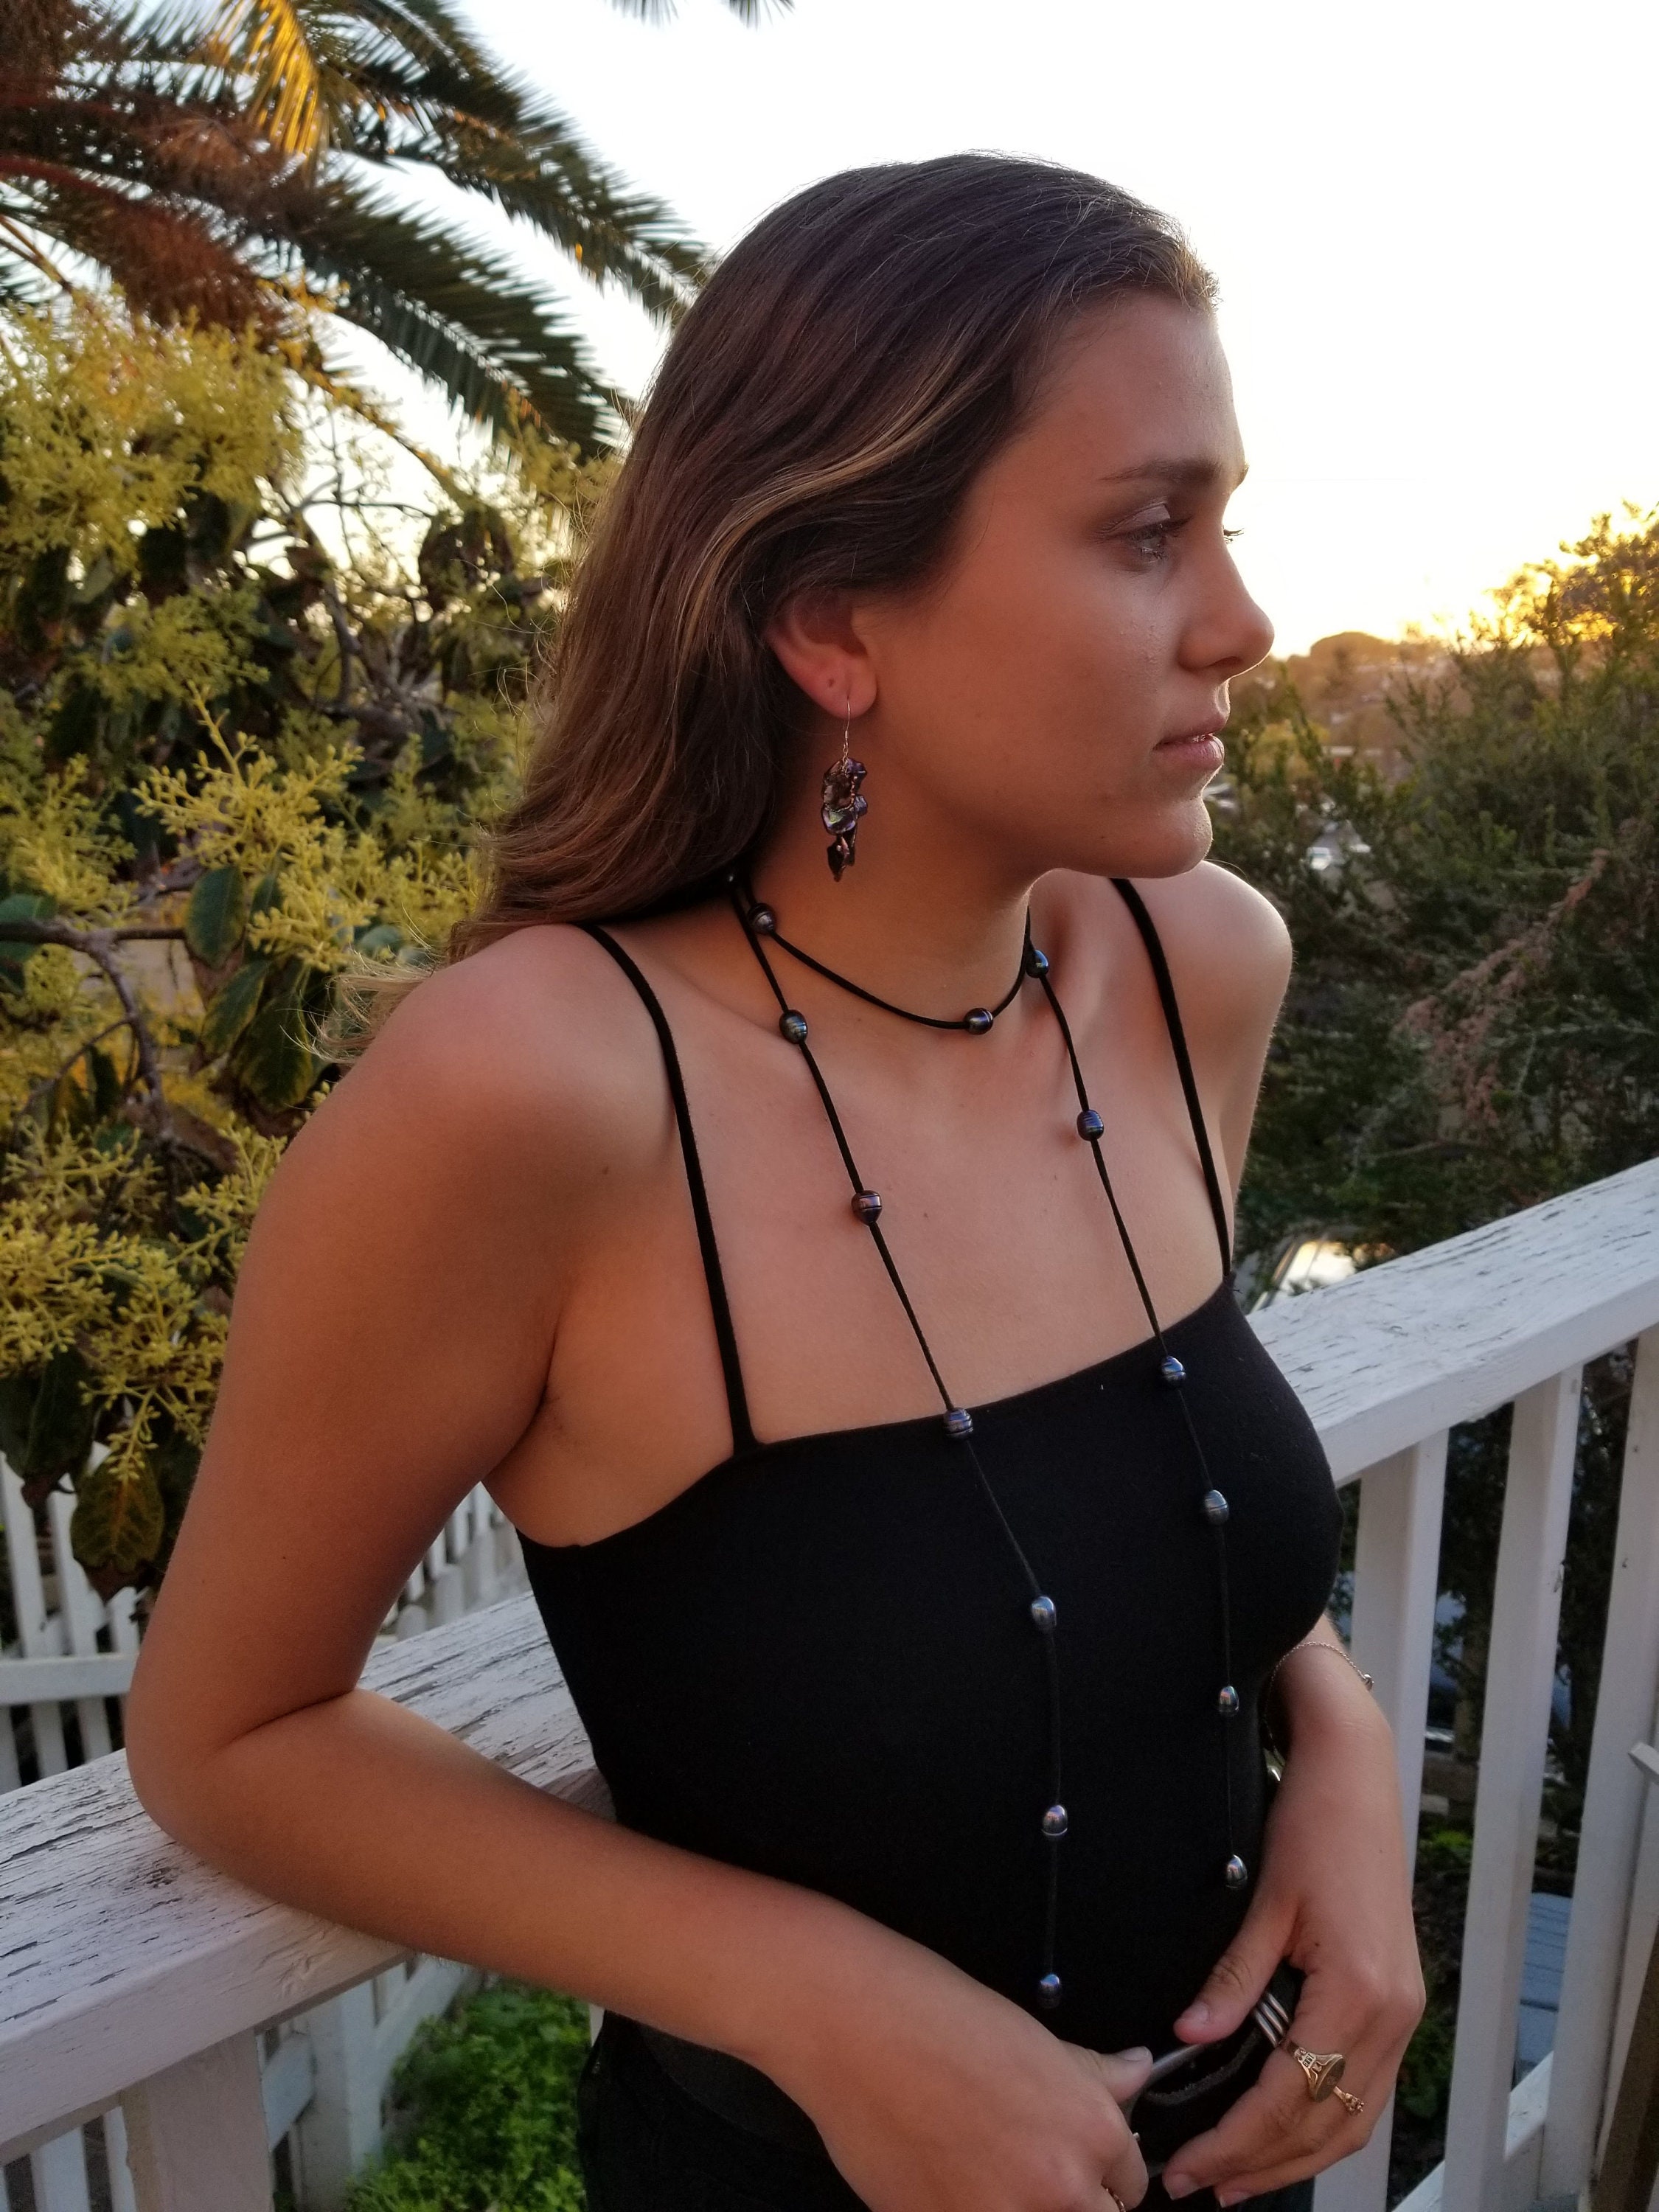 Black Leather Necklace 